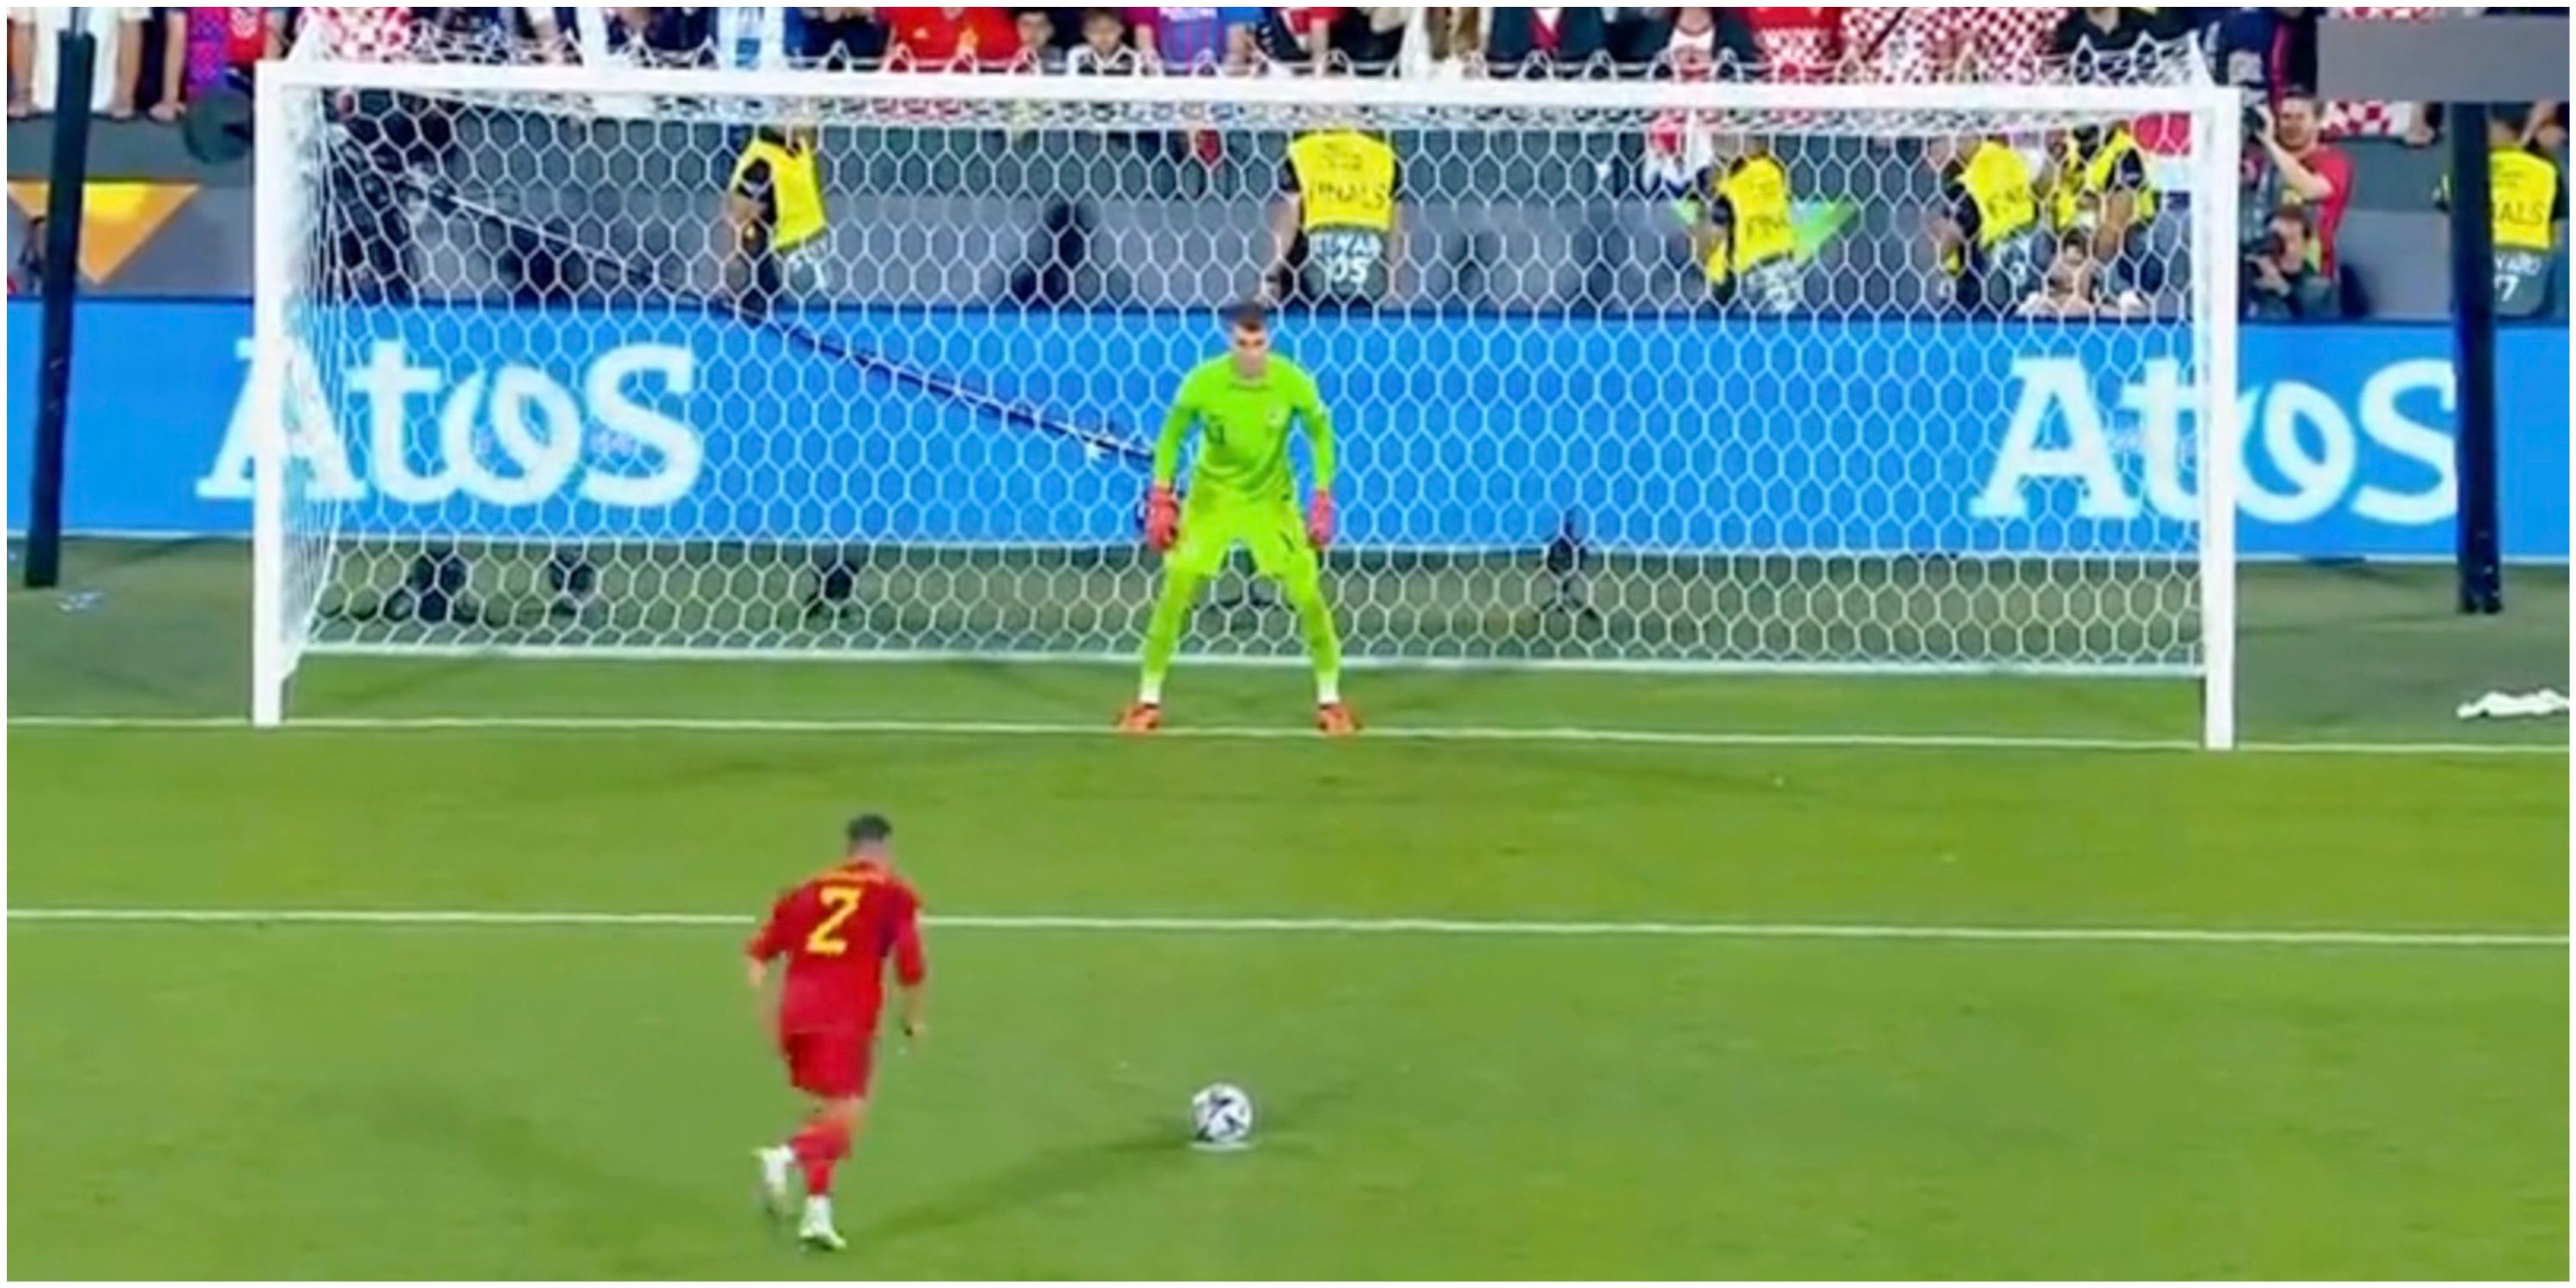 Dani Carvajal’s penalty to win Spain the Nations League v Croatia was ice cold